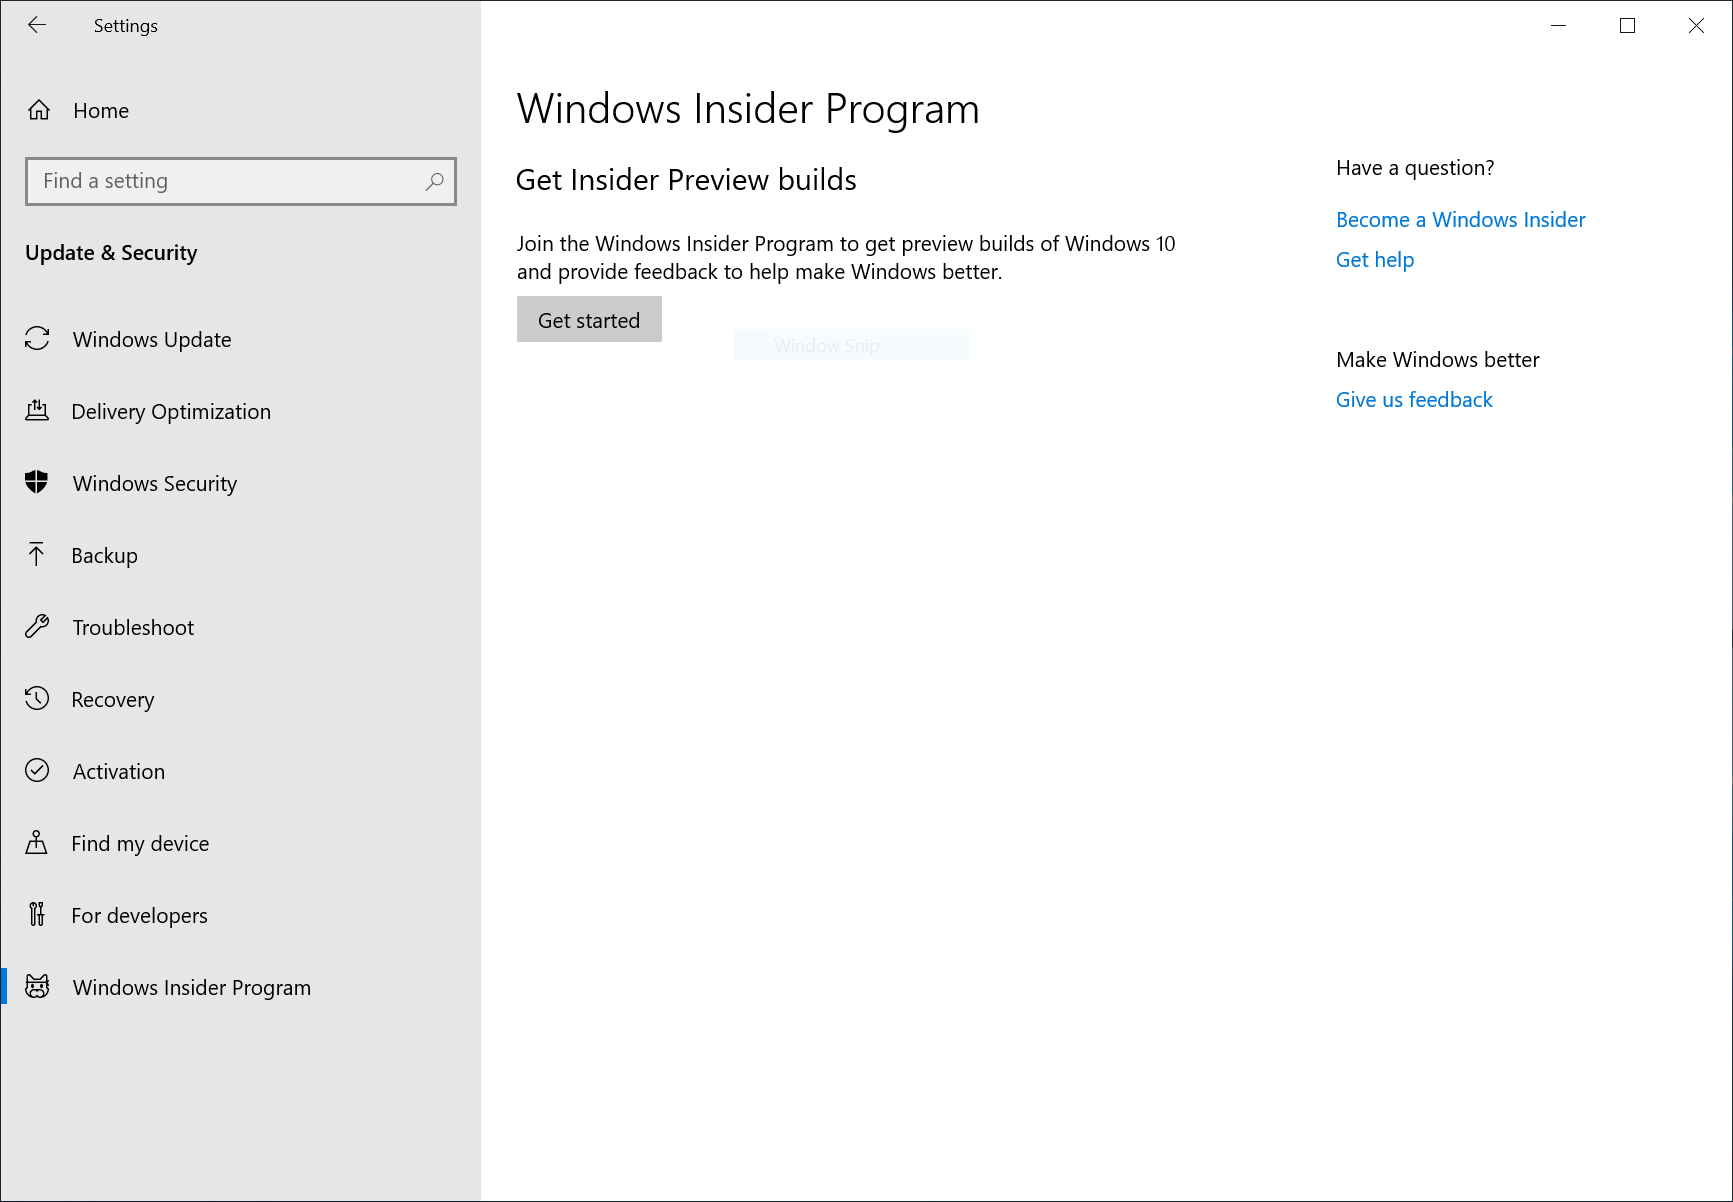 Go to Settings > Update & Security > Windows Insider Program and click the “Get started” button. 